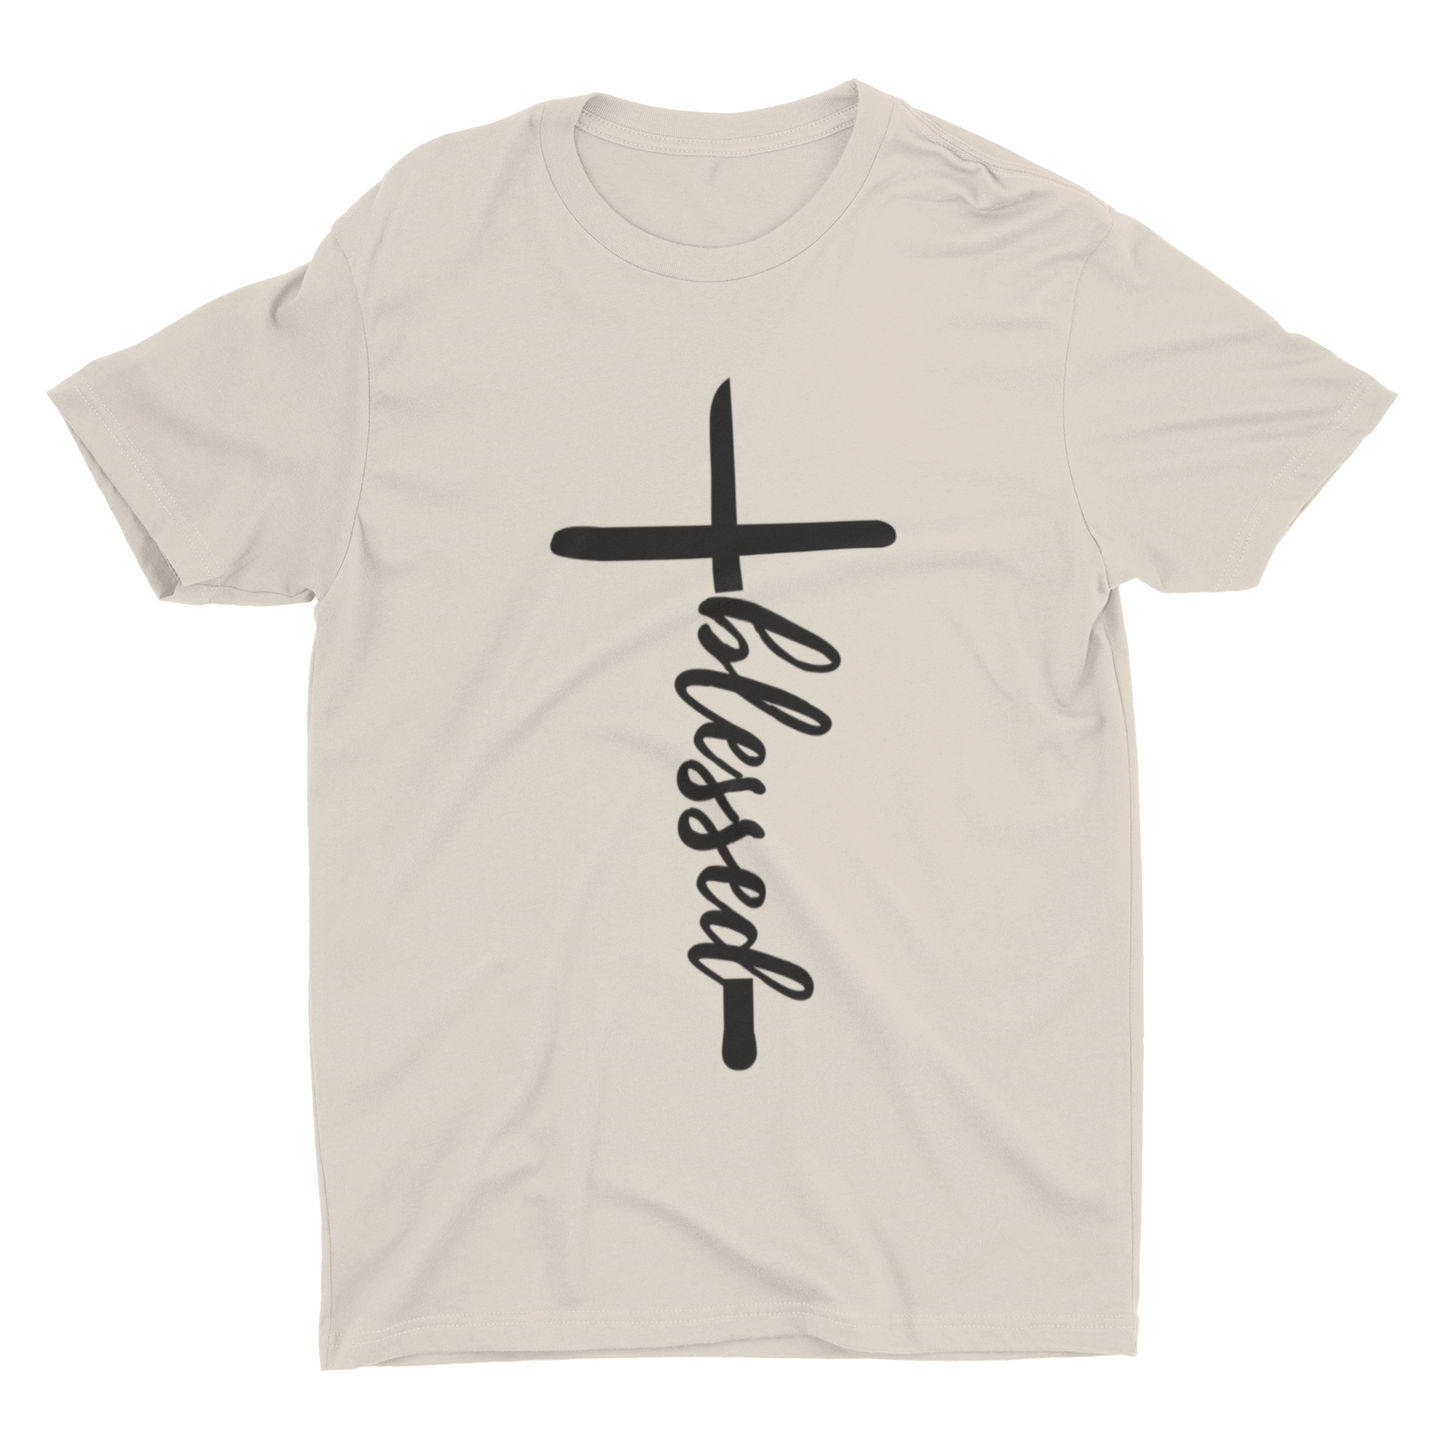 Blessed cross graphic t-shirt for fall